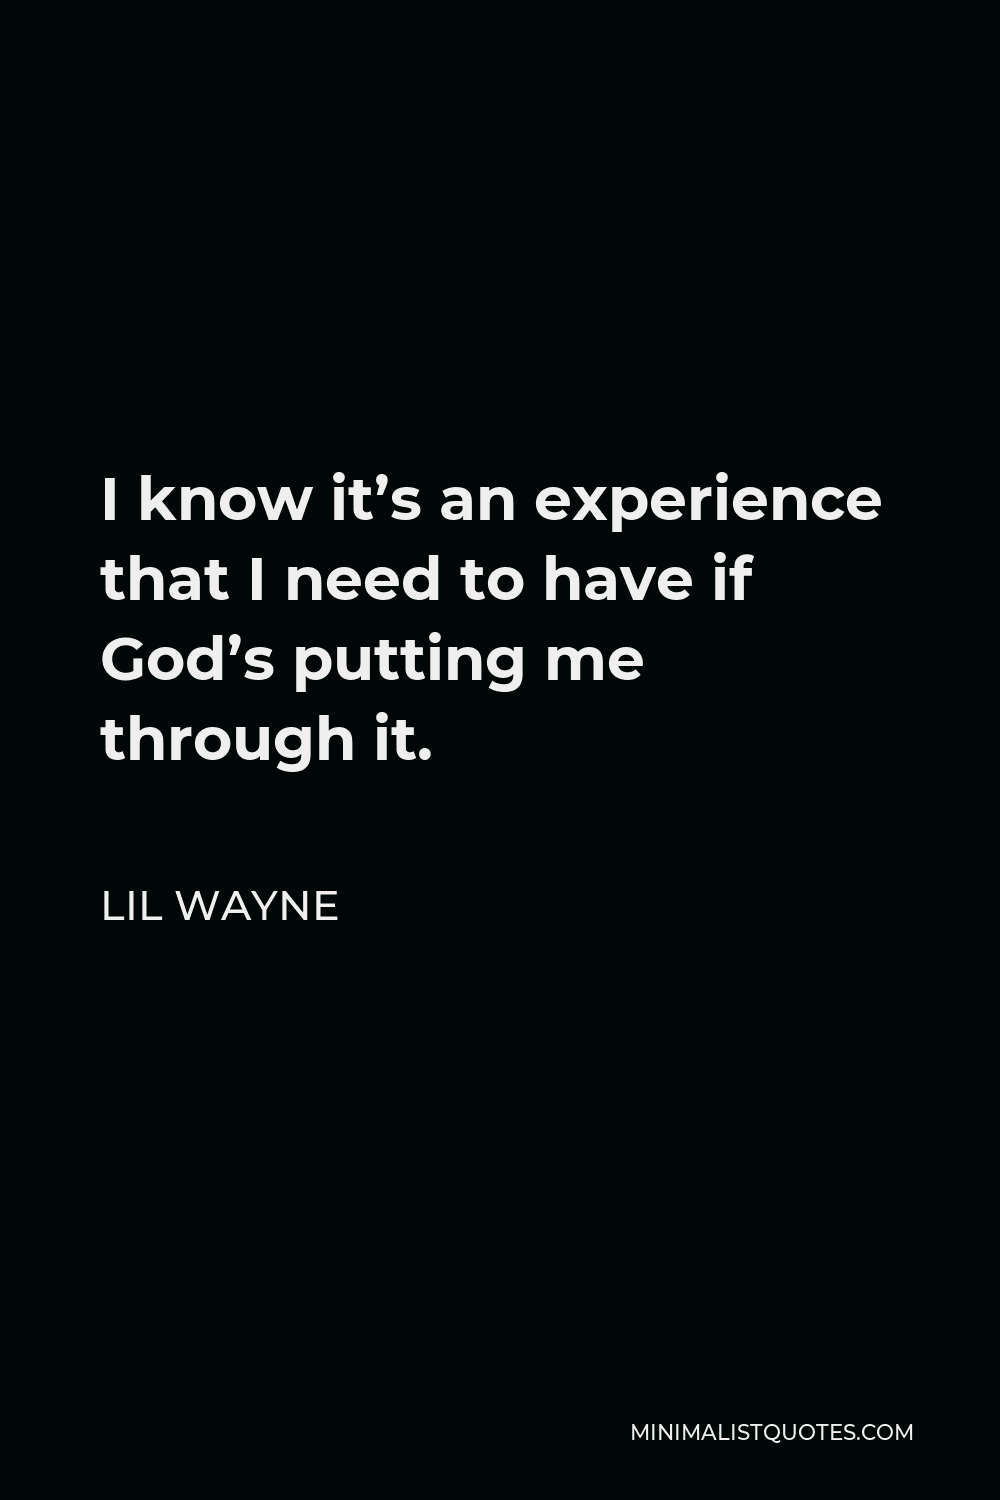 Lil Wayne Quote - I know it’s an experience that I need to have if God’s putting me through it.